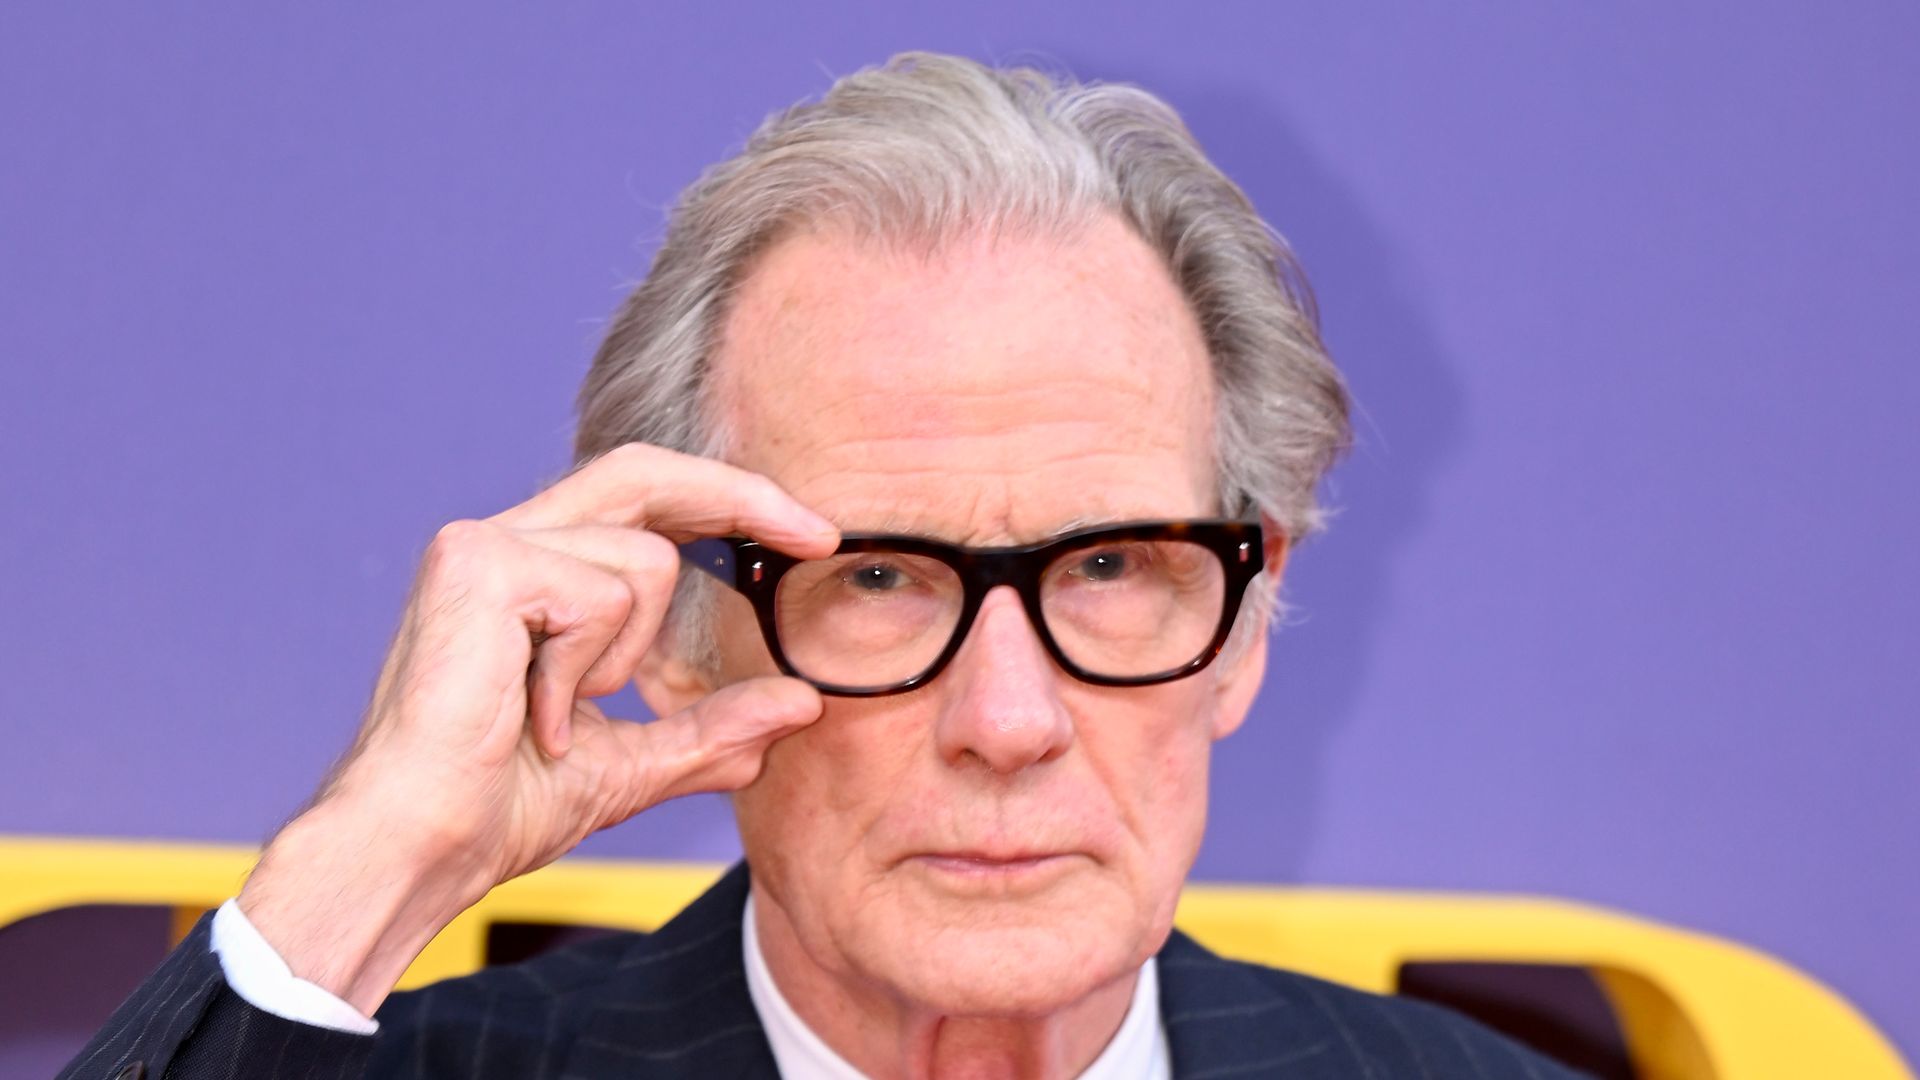 Bill Nighy with glasses and suit 